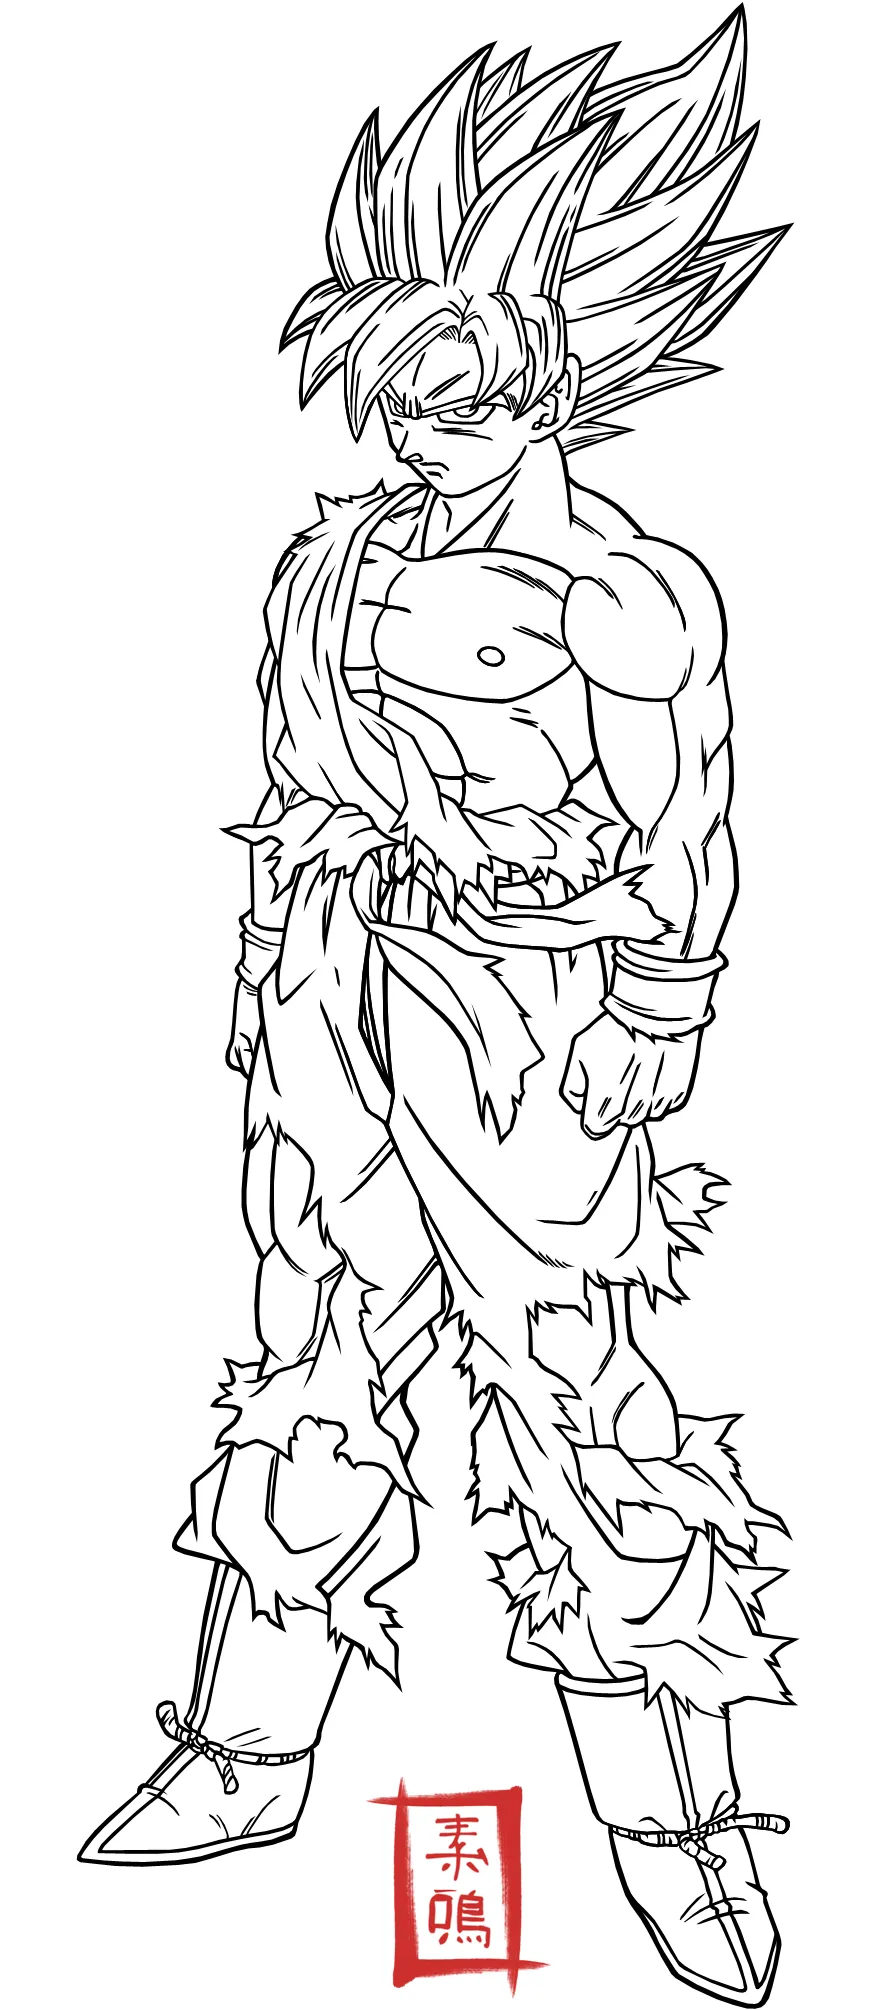 Goku Ssj4 Coloring Pages To Print Crokky Coloring Pages